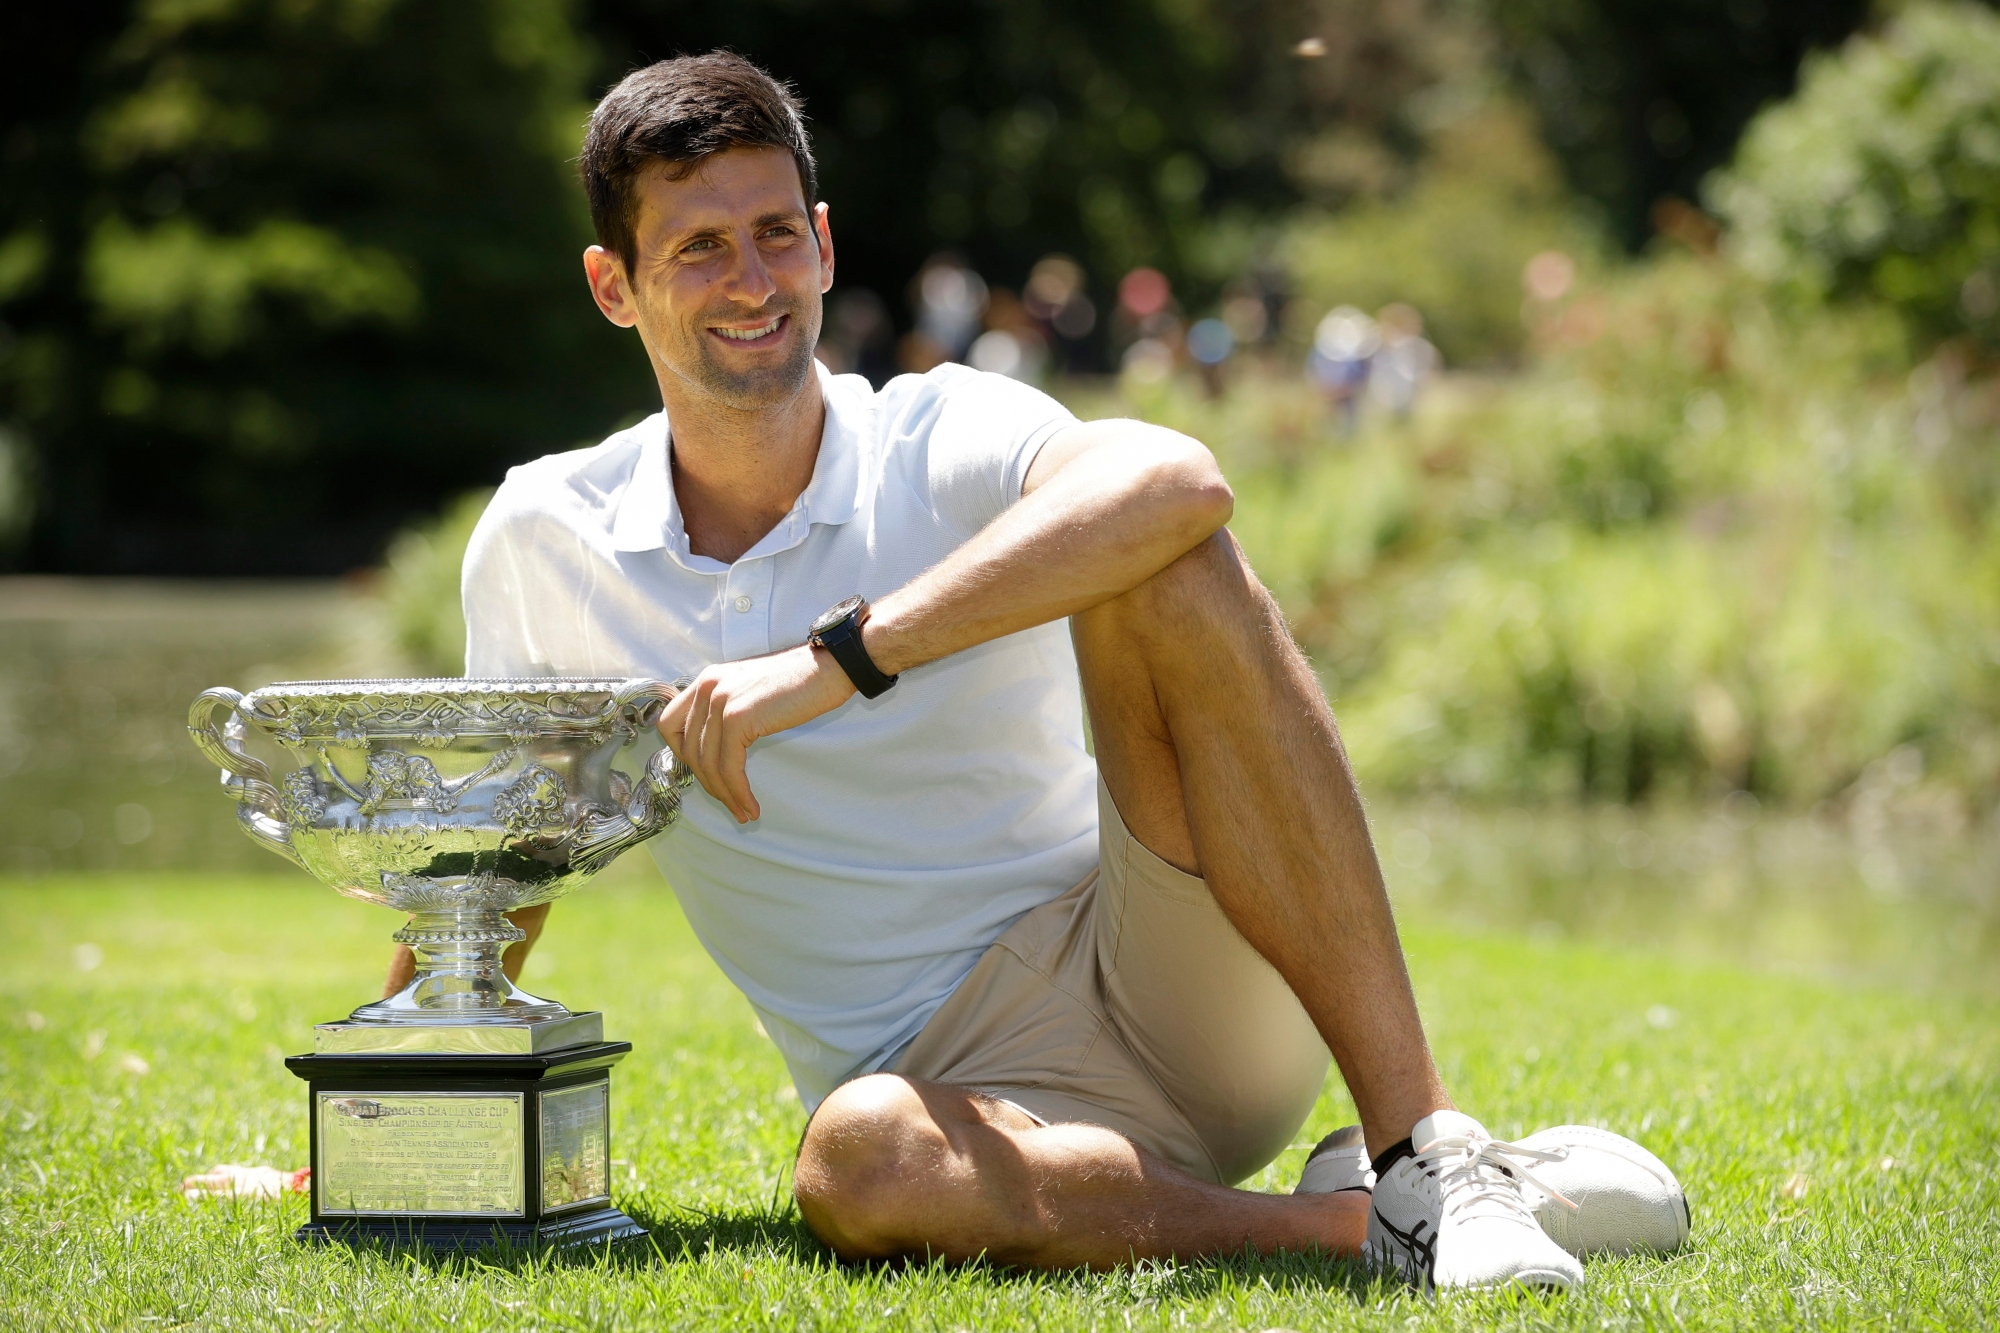 Serbia's Novak Djokovic poses with his trophy, the Norman Brookes Challenge Cup, at Melbourne's Royal Botanic Gardens following his win over Rafael Nadal of Spain in the men's singles final at the Australian Open tennis championships in Melbourne, Australia, Monday, Jan. 28, 2019. (AP Photo/Mark Schiefelbein) Australian Open Tennis